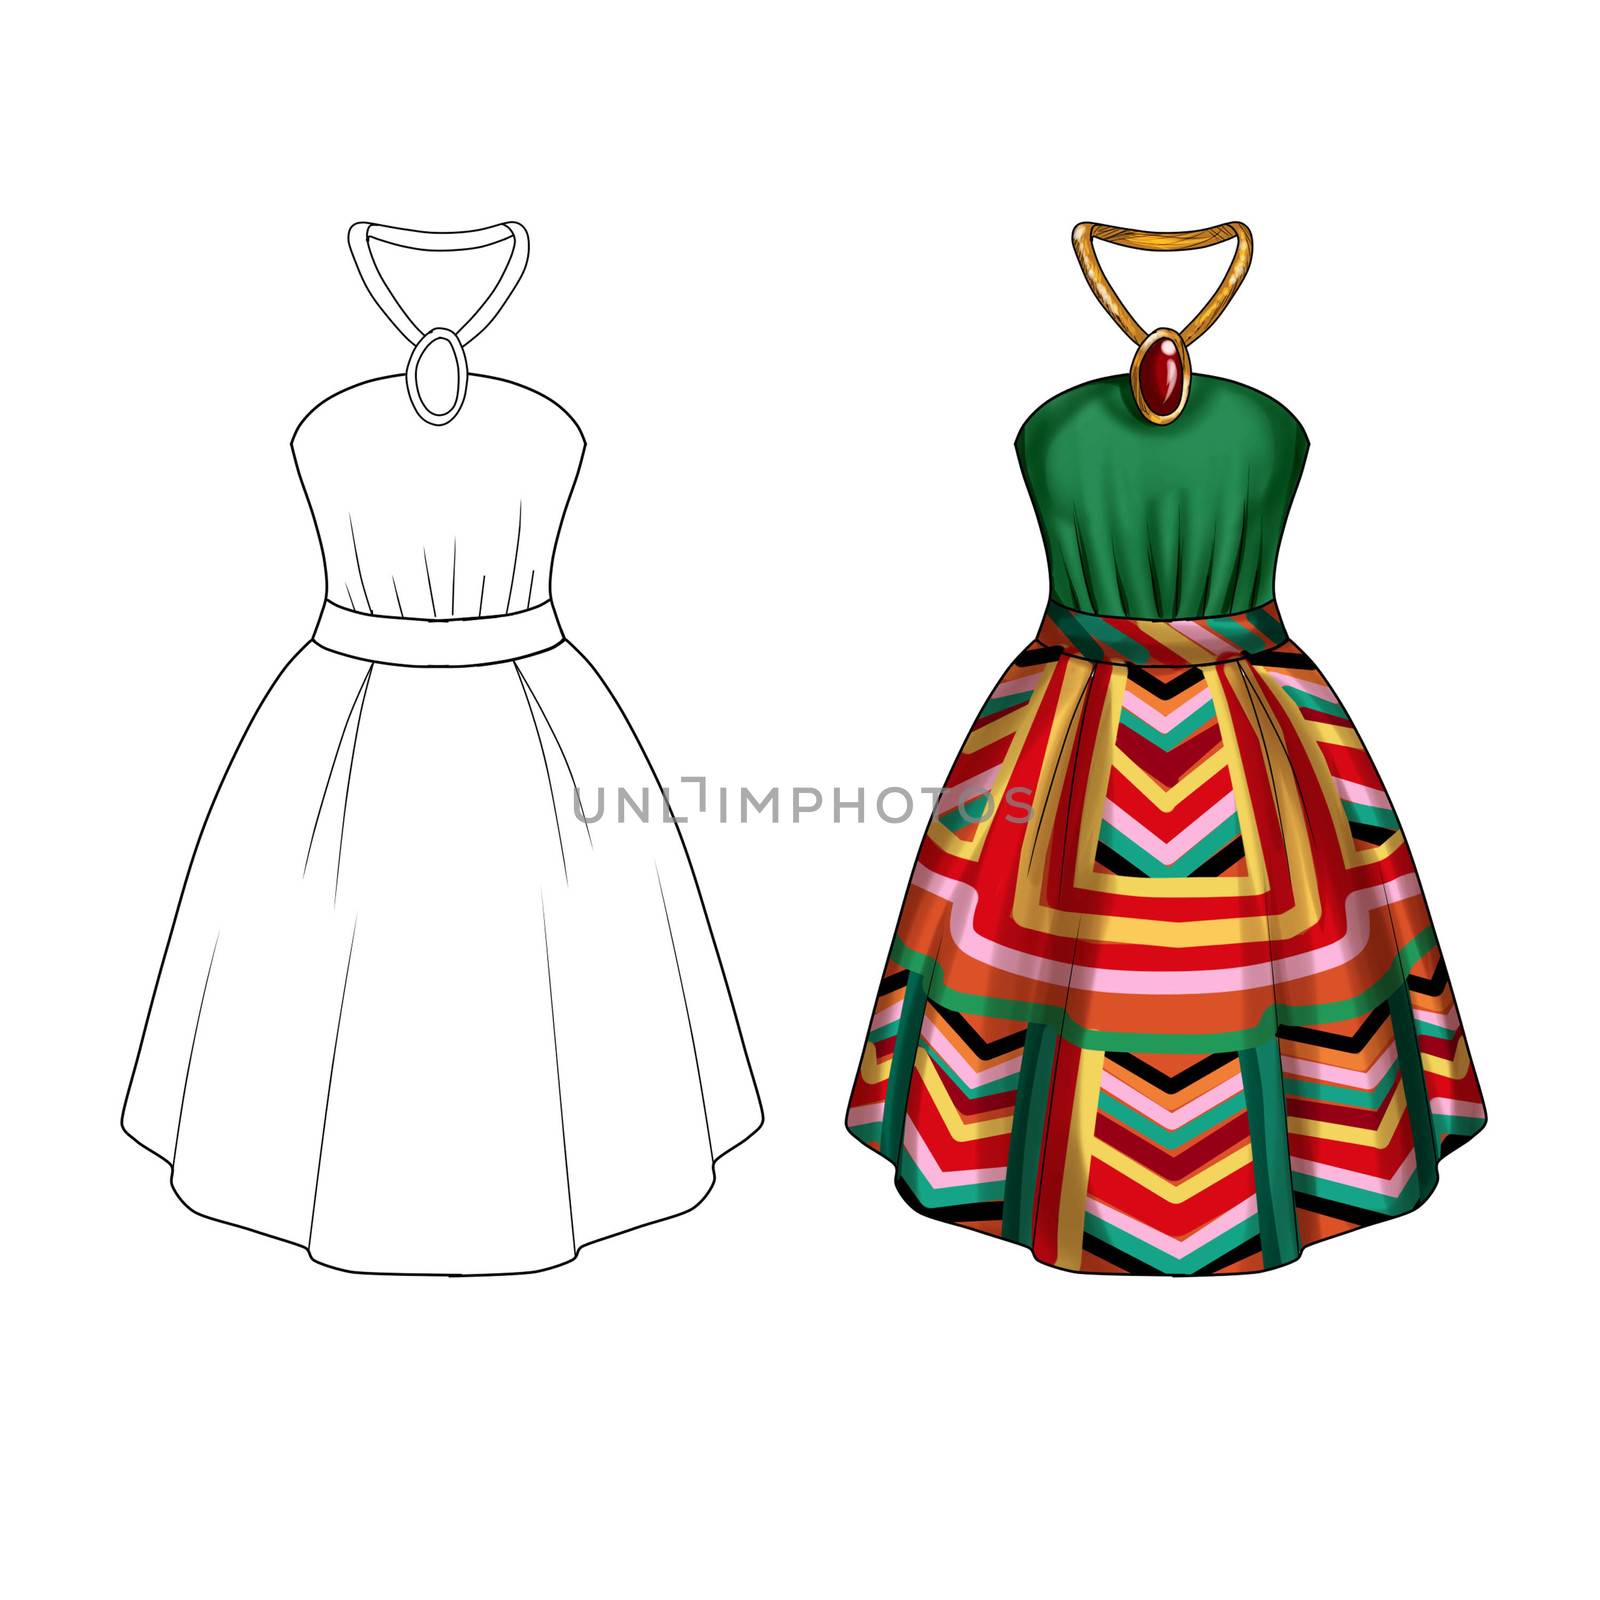 Flat Fashion Template Illustration - Party dress with collar tie and wide skirt in printed geometrical fabric by GGillustrations